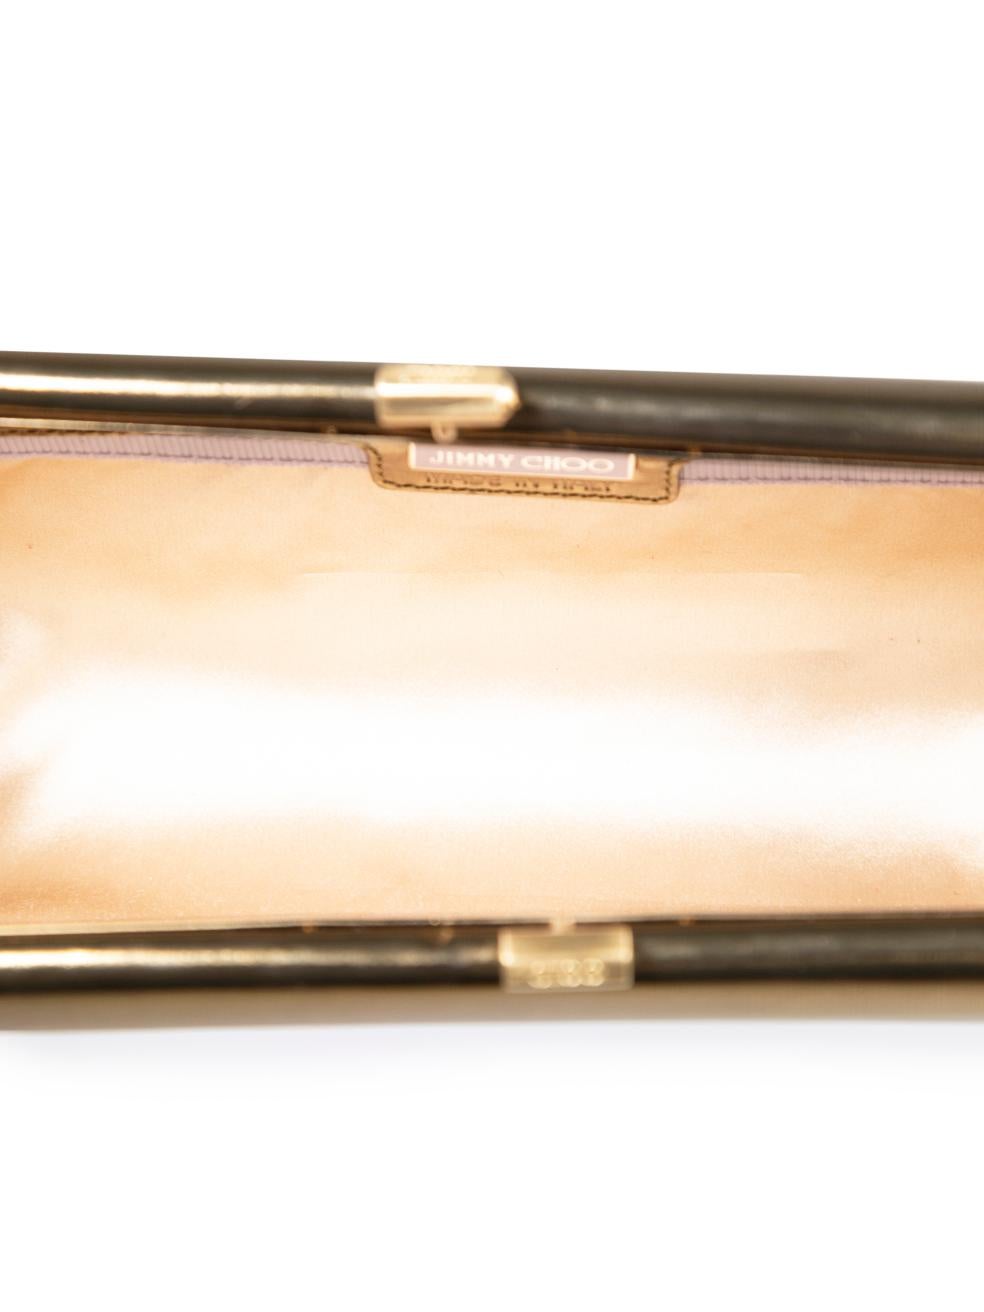 Jimmy Choo Gold Patent Leather Clasp Clutch For Sale 1